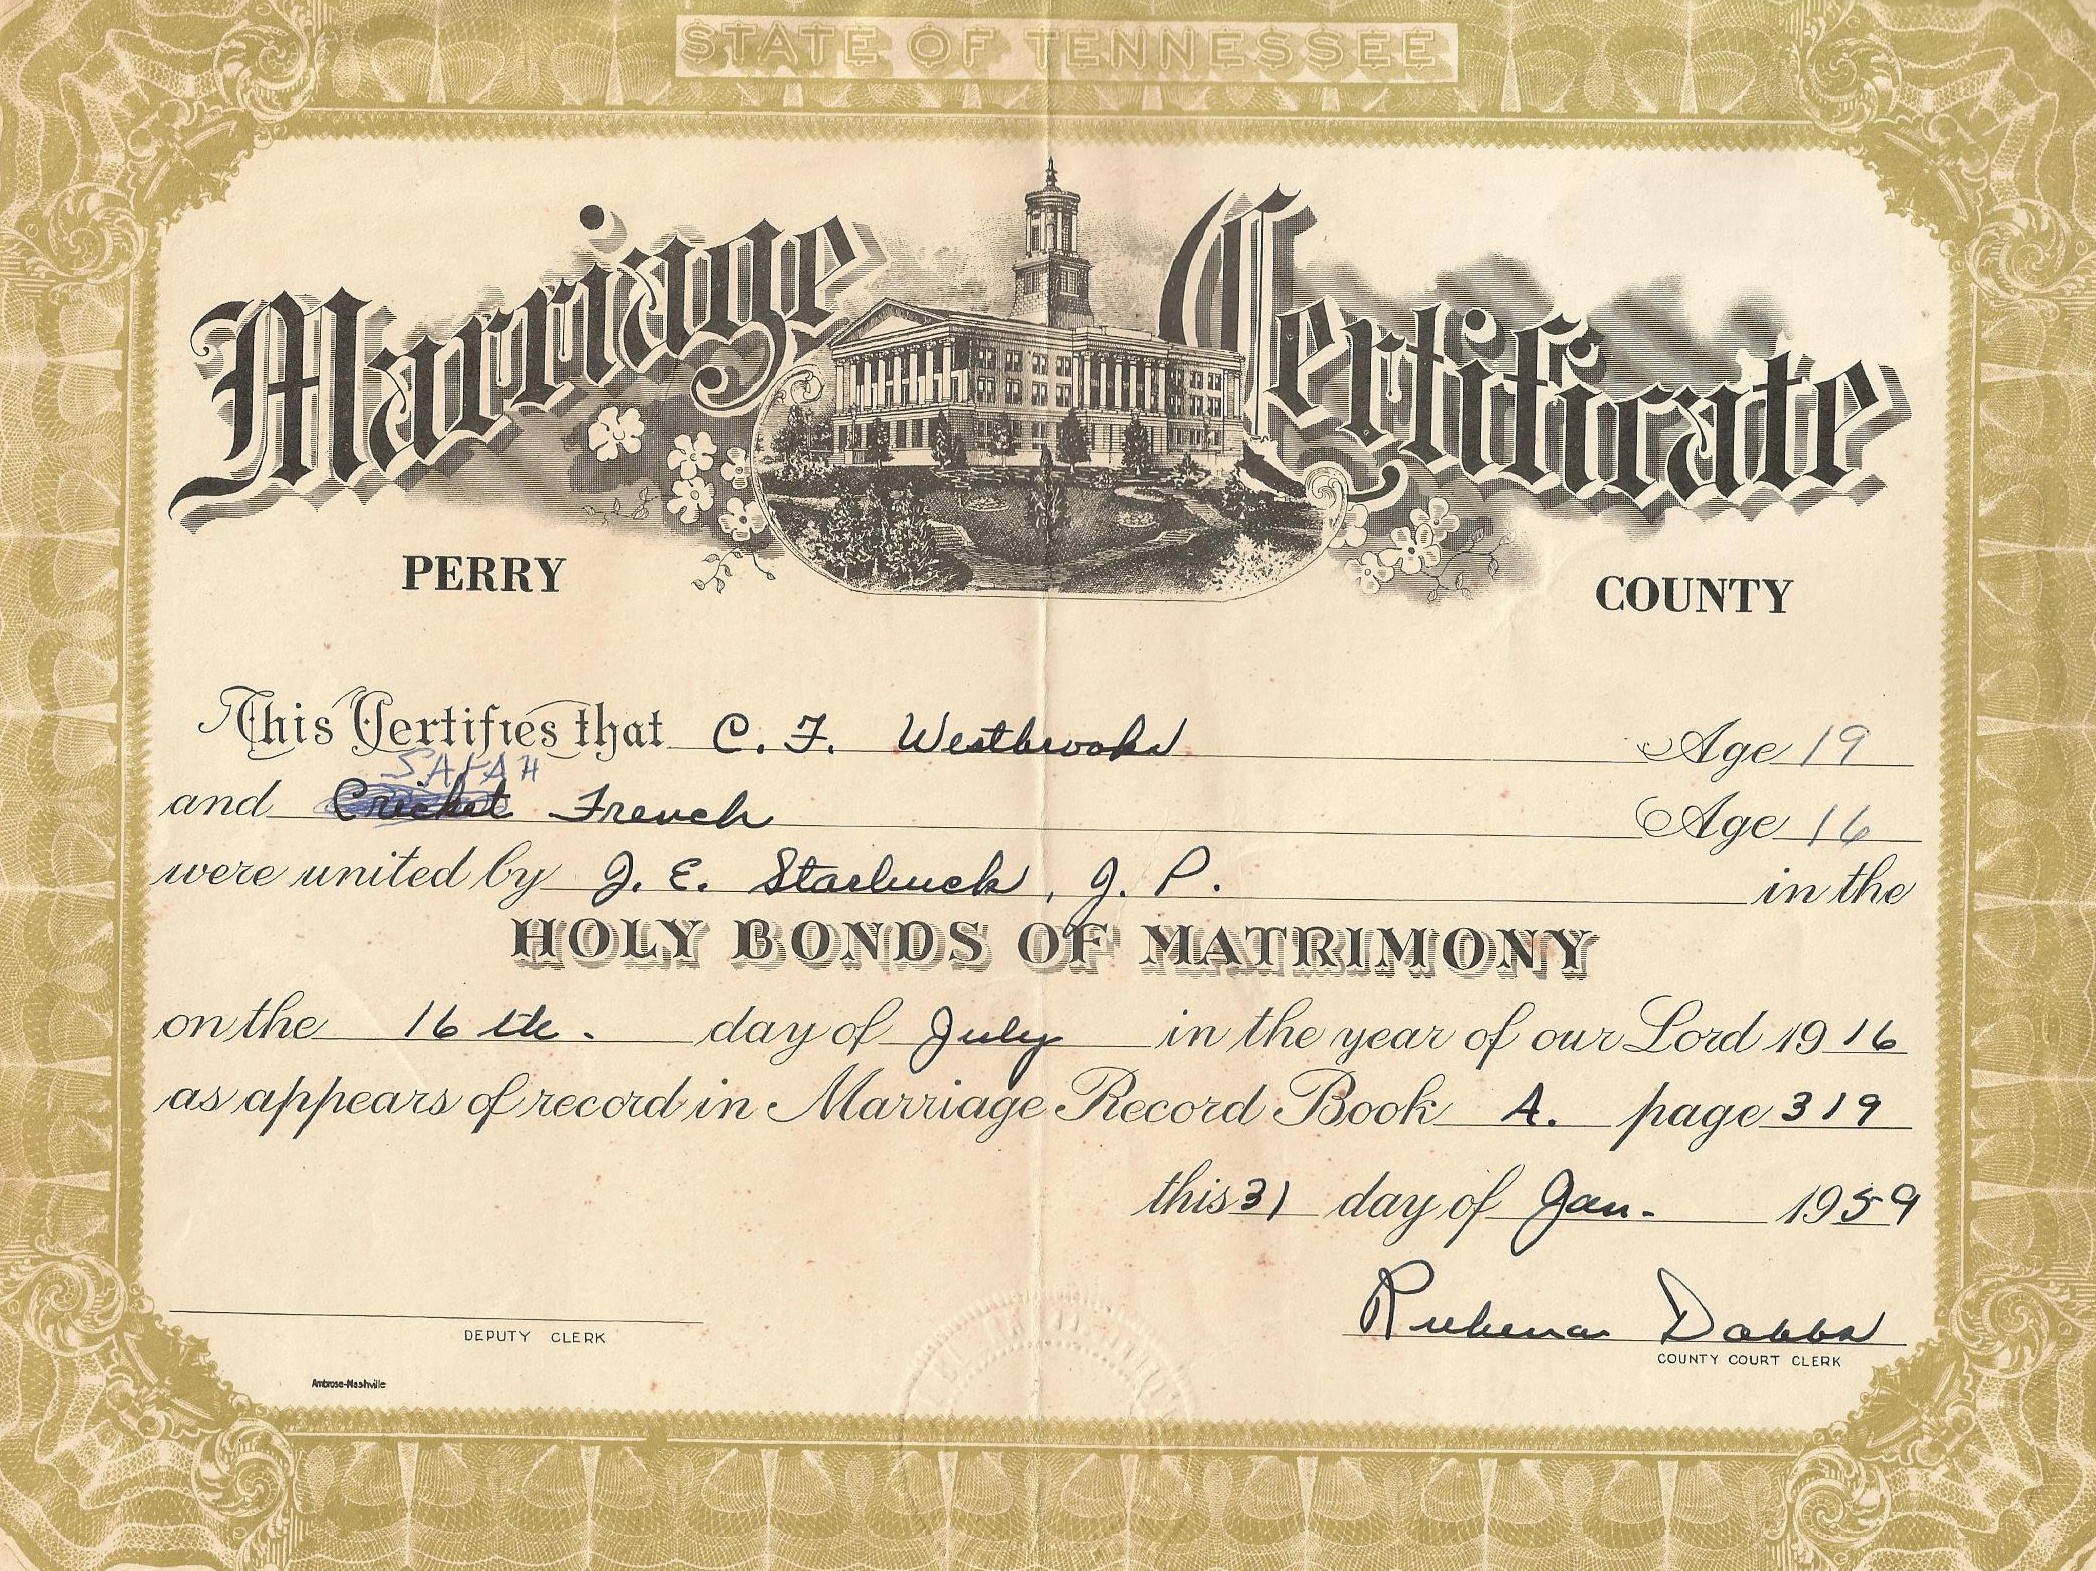 Westbrooks Marriage License – Perry County, TNGenWeb